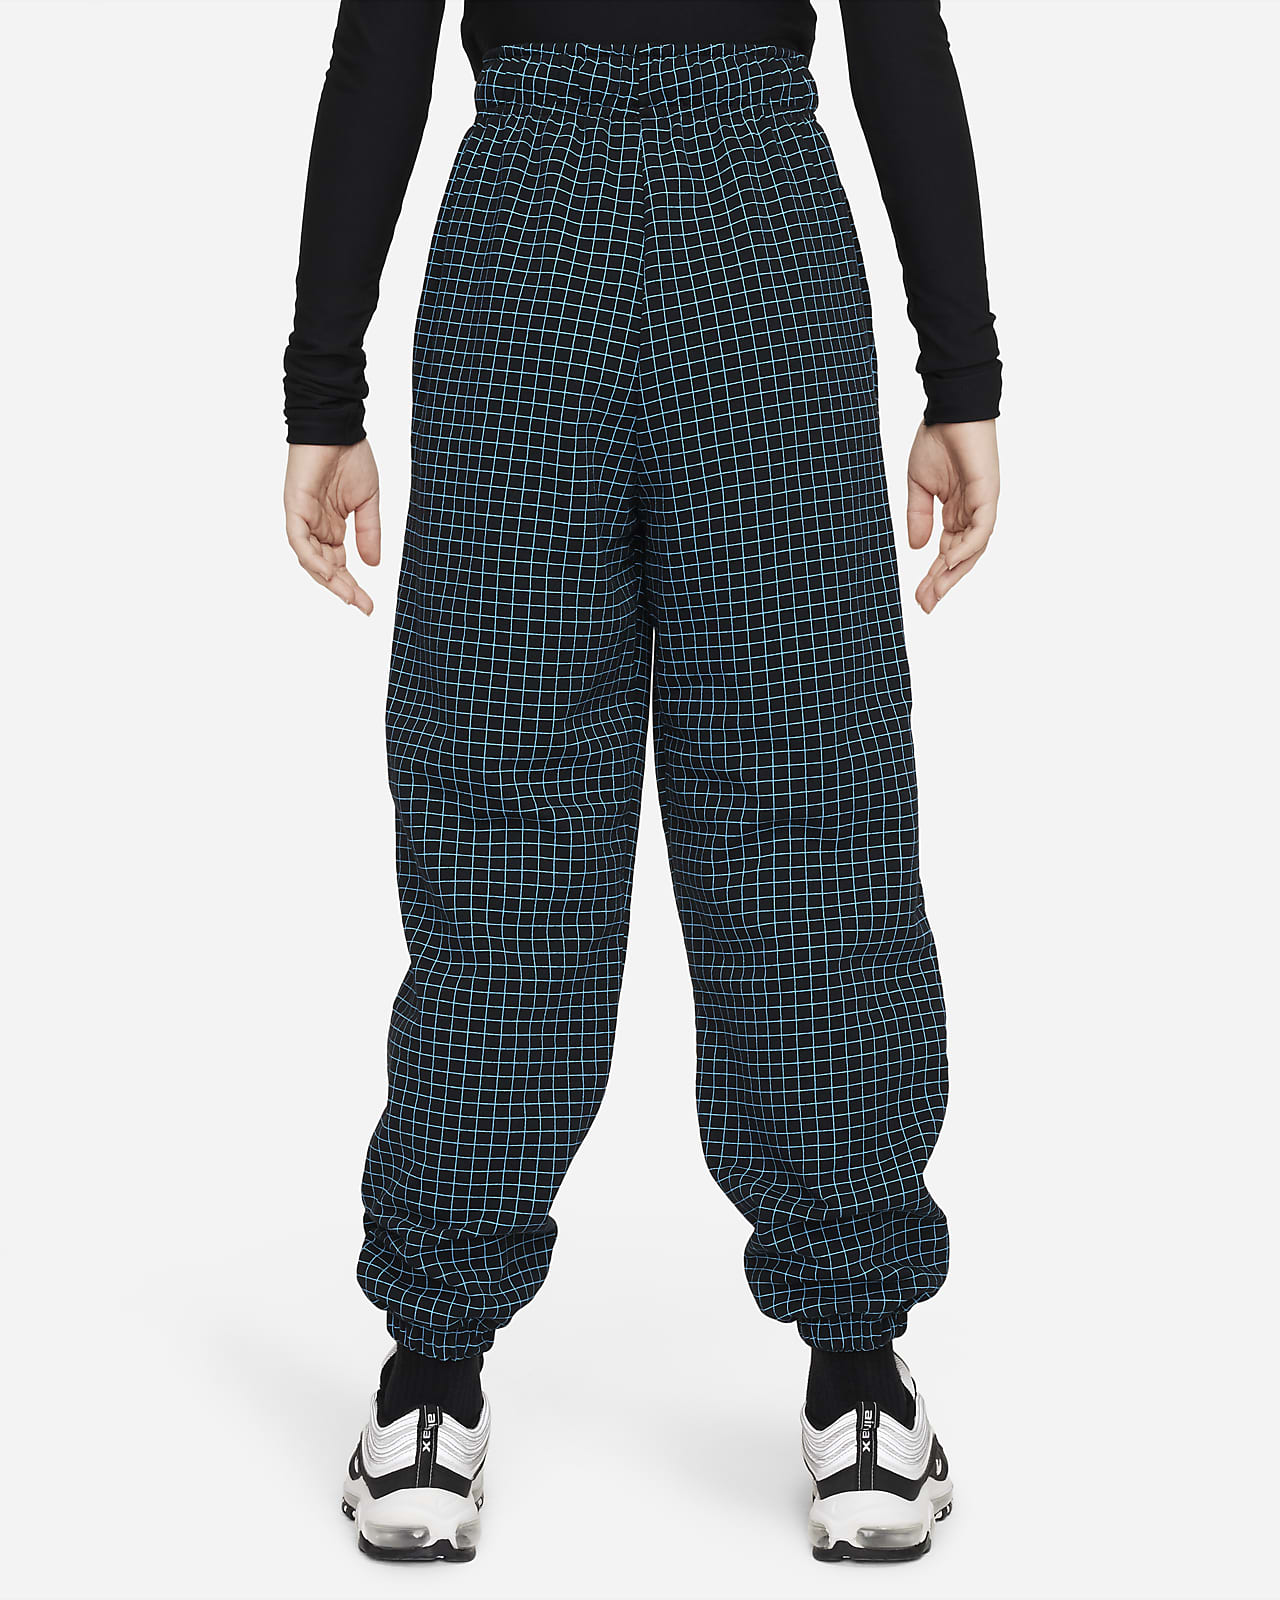 Buy Nike Trousers online  Women  98 products  FASHIOLAin